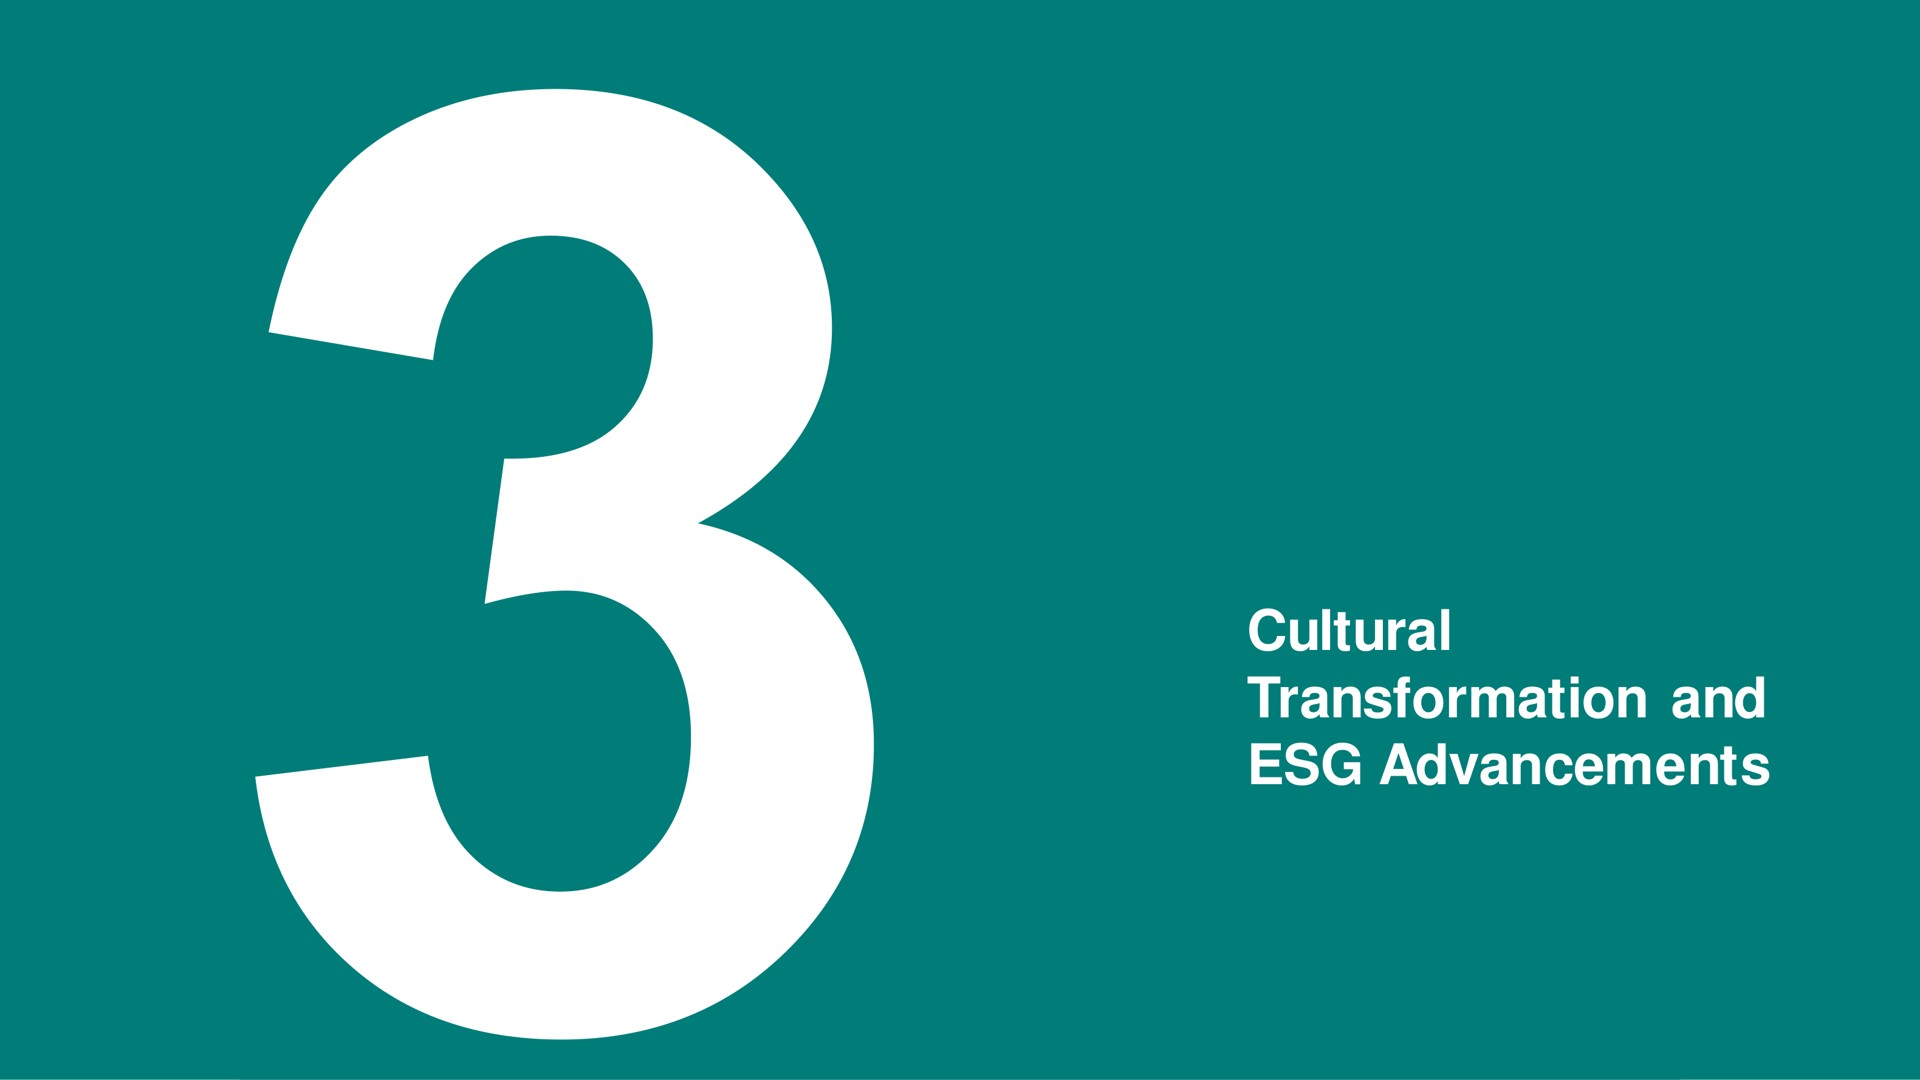 cultural transformation and advancements | Vale